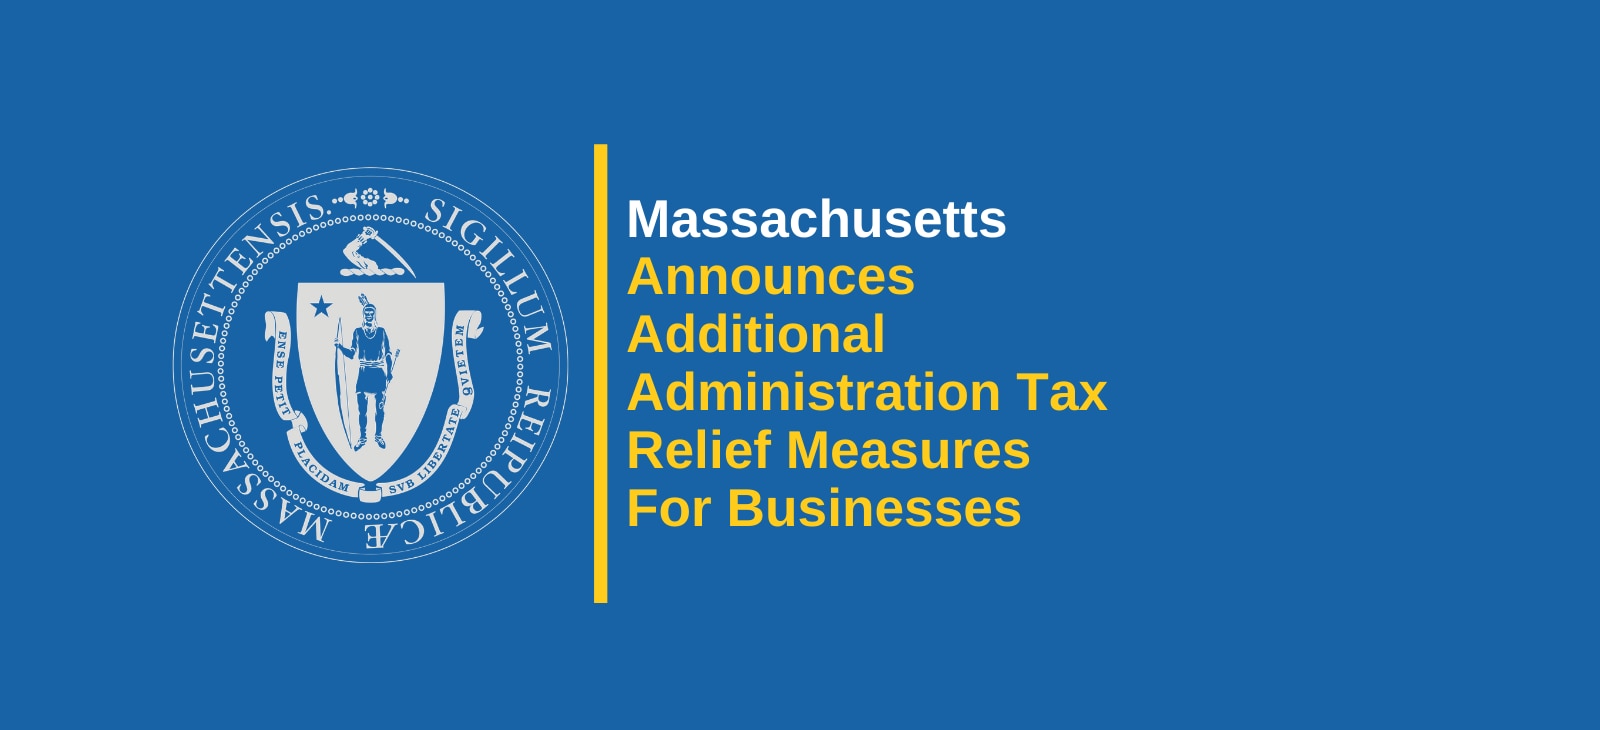 Massachusetts Announces Additional Administrative Tax Relief Measures for Businesses Across Massachusetts